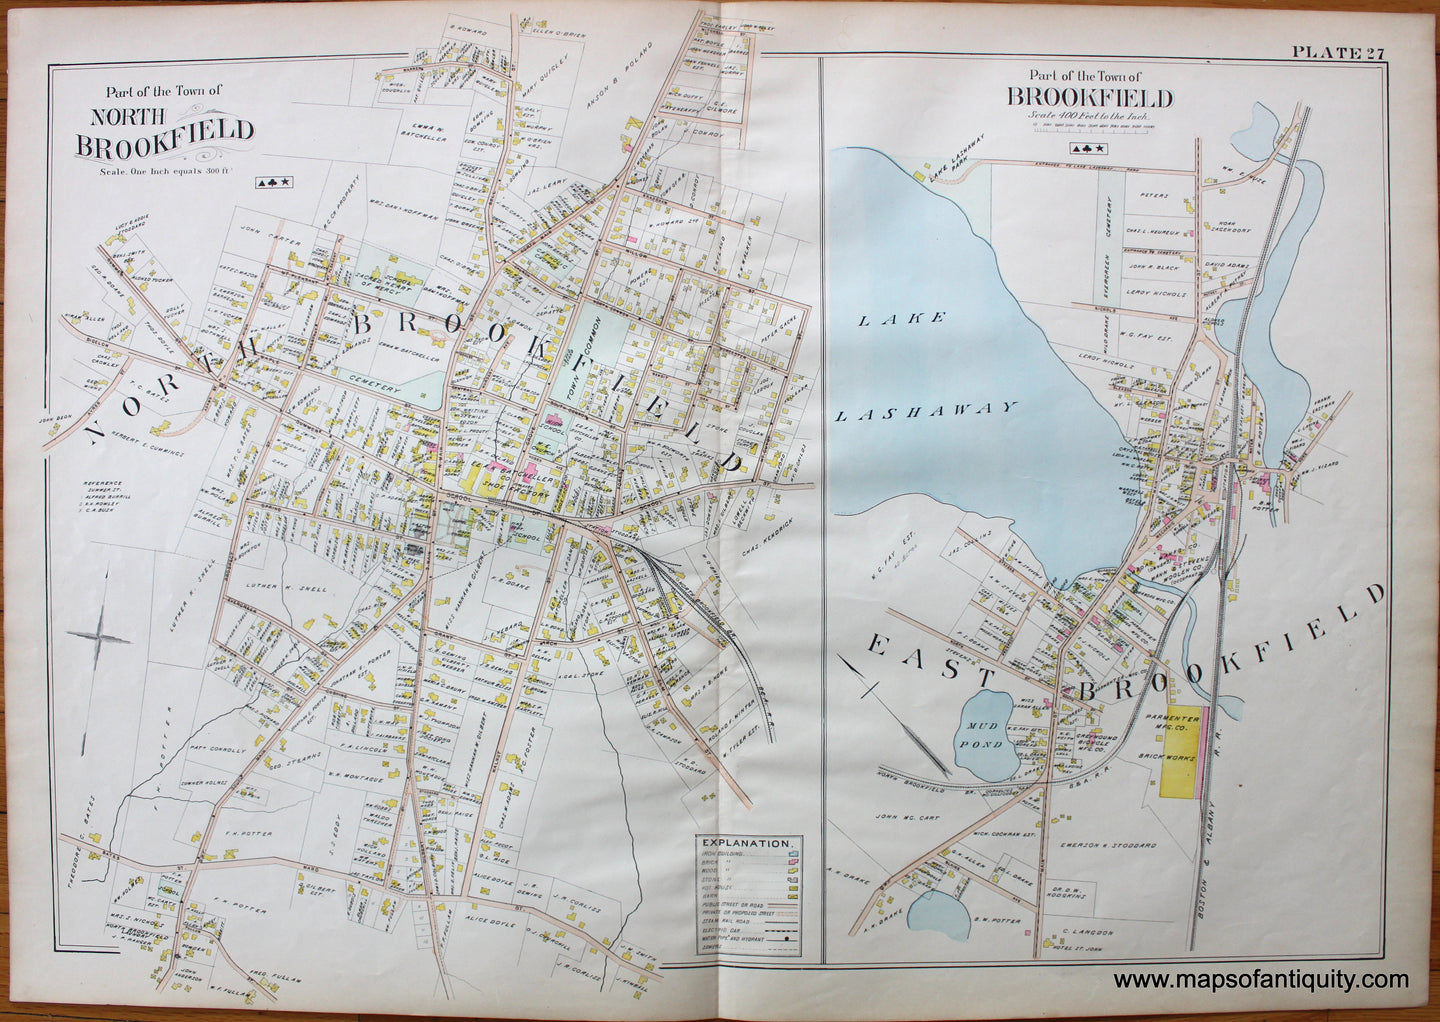 Antique-Map-Part-of-the-Town-of-North-Brookfield-Brookfield-East-Brookfield-Plate-27